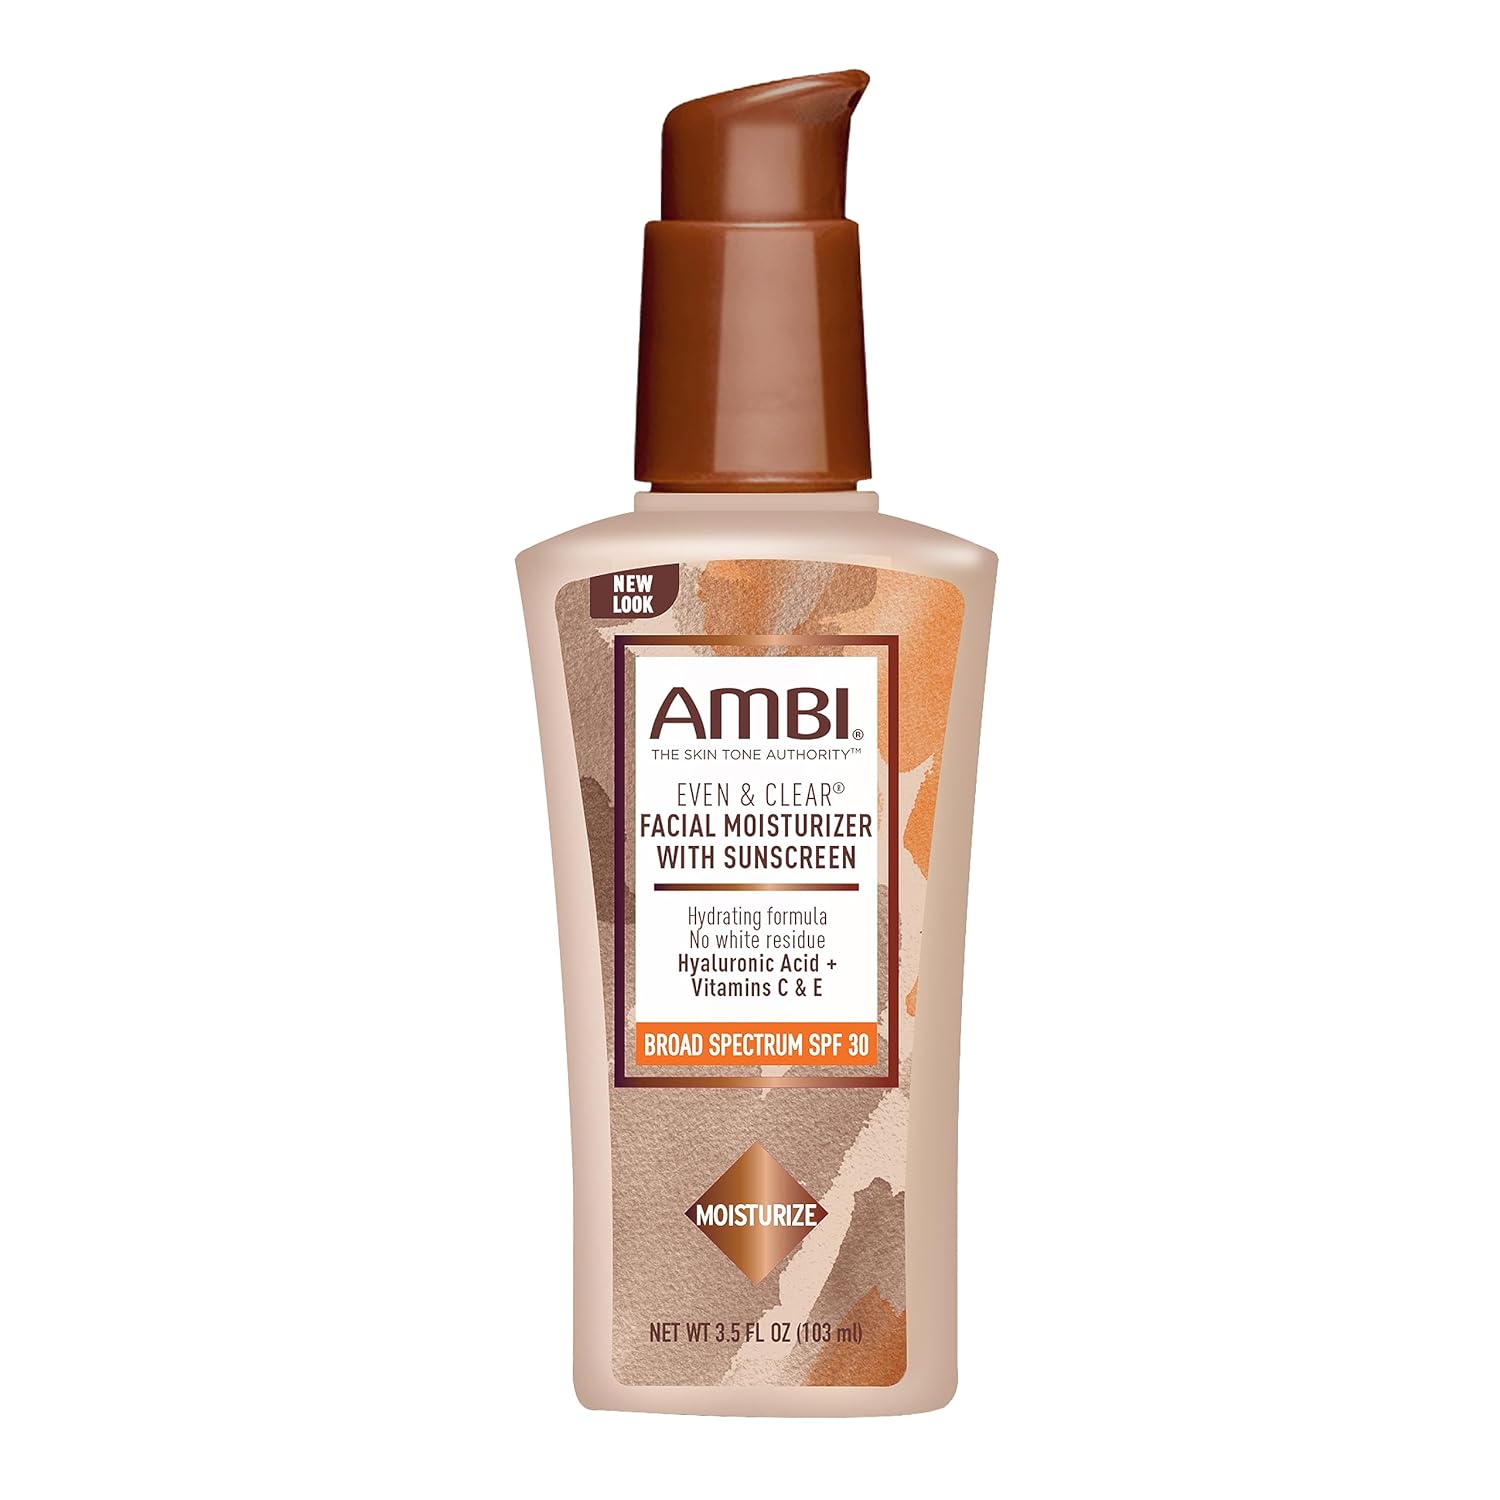 Ambi Even & Clear Daily Facial Moist…